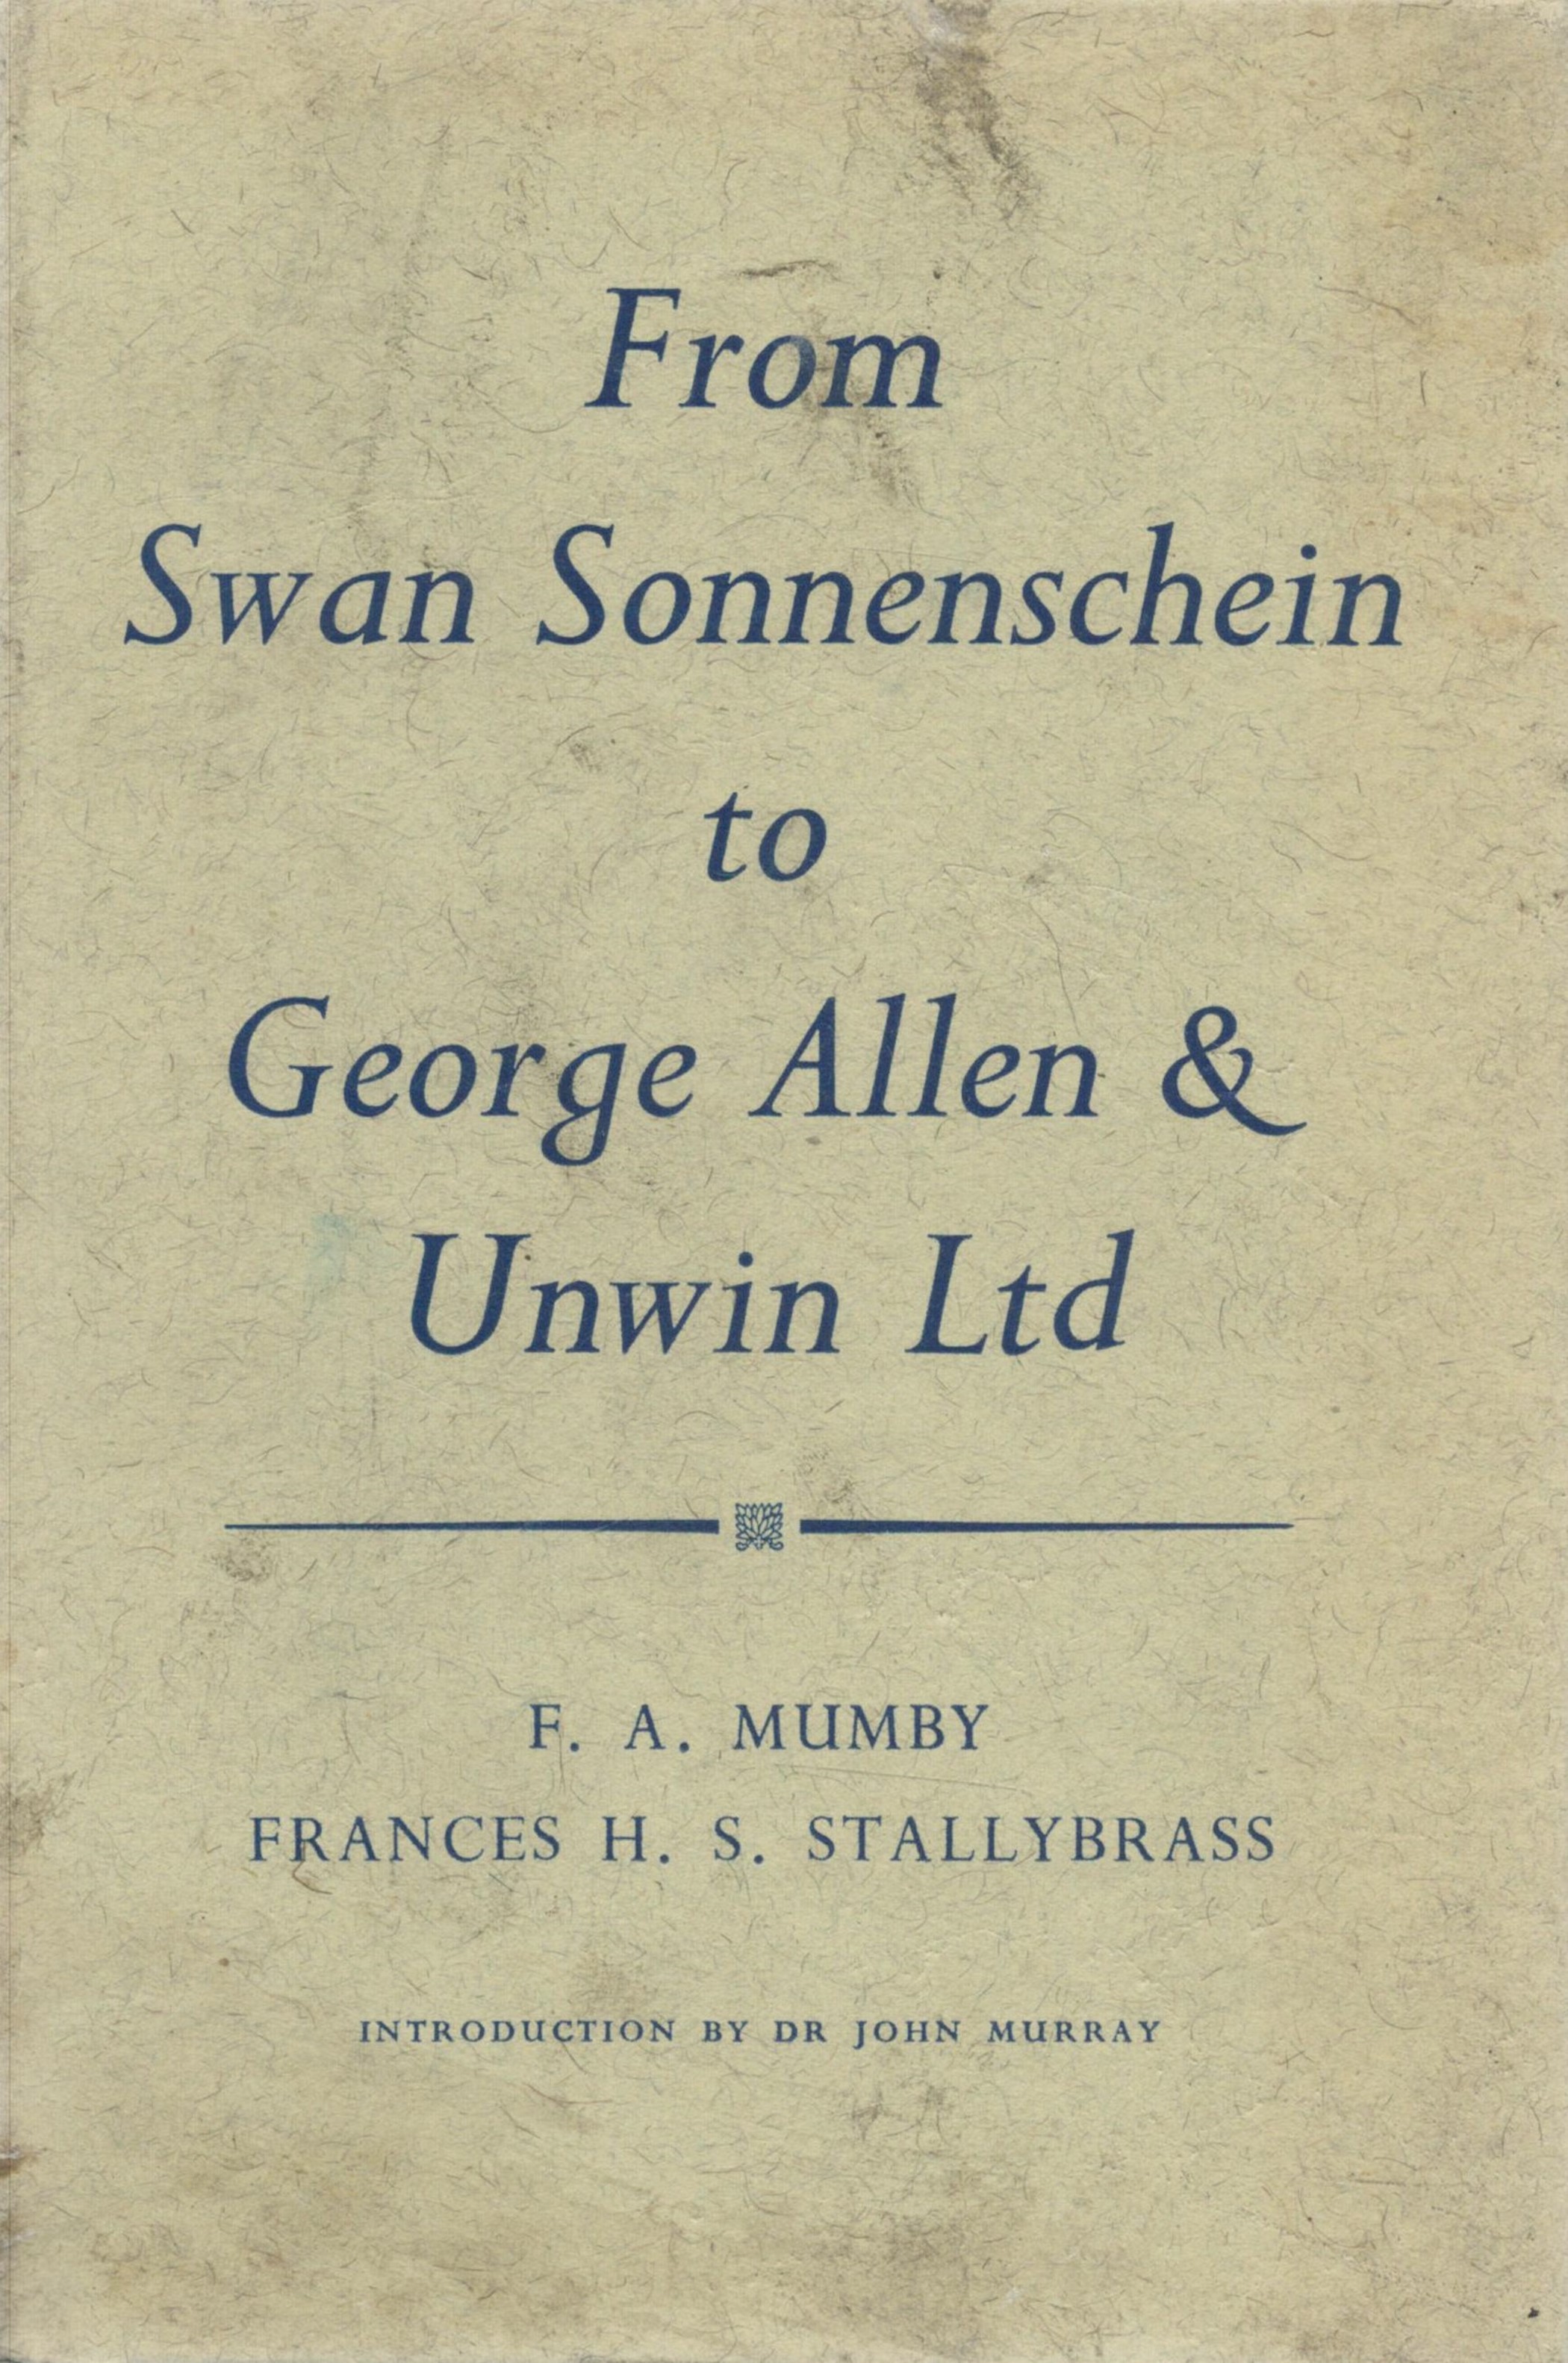 From Swan Sonnenschein to George Allen and Unwin Ltd. By F.A. Mumby and Frances H.S. Stallybrass.